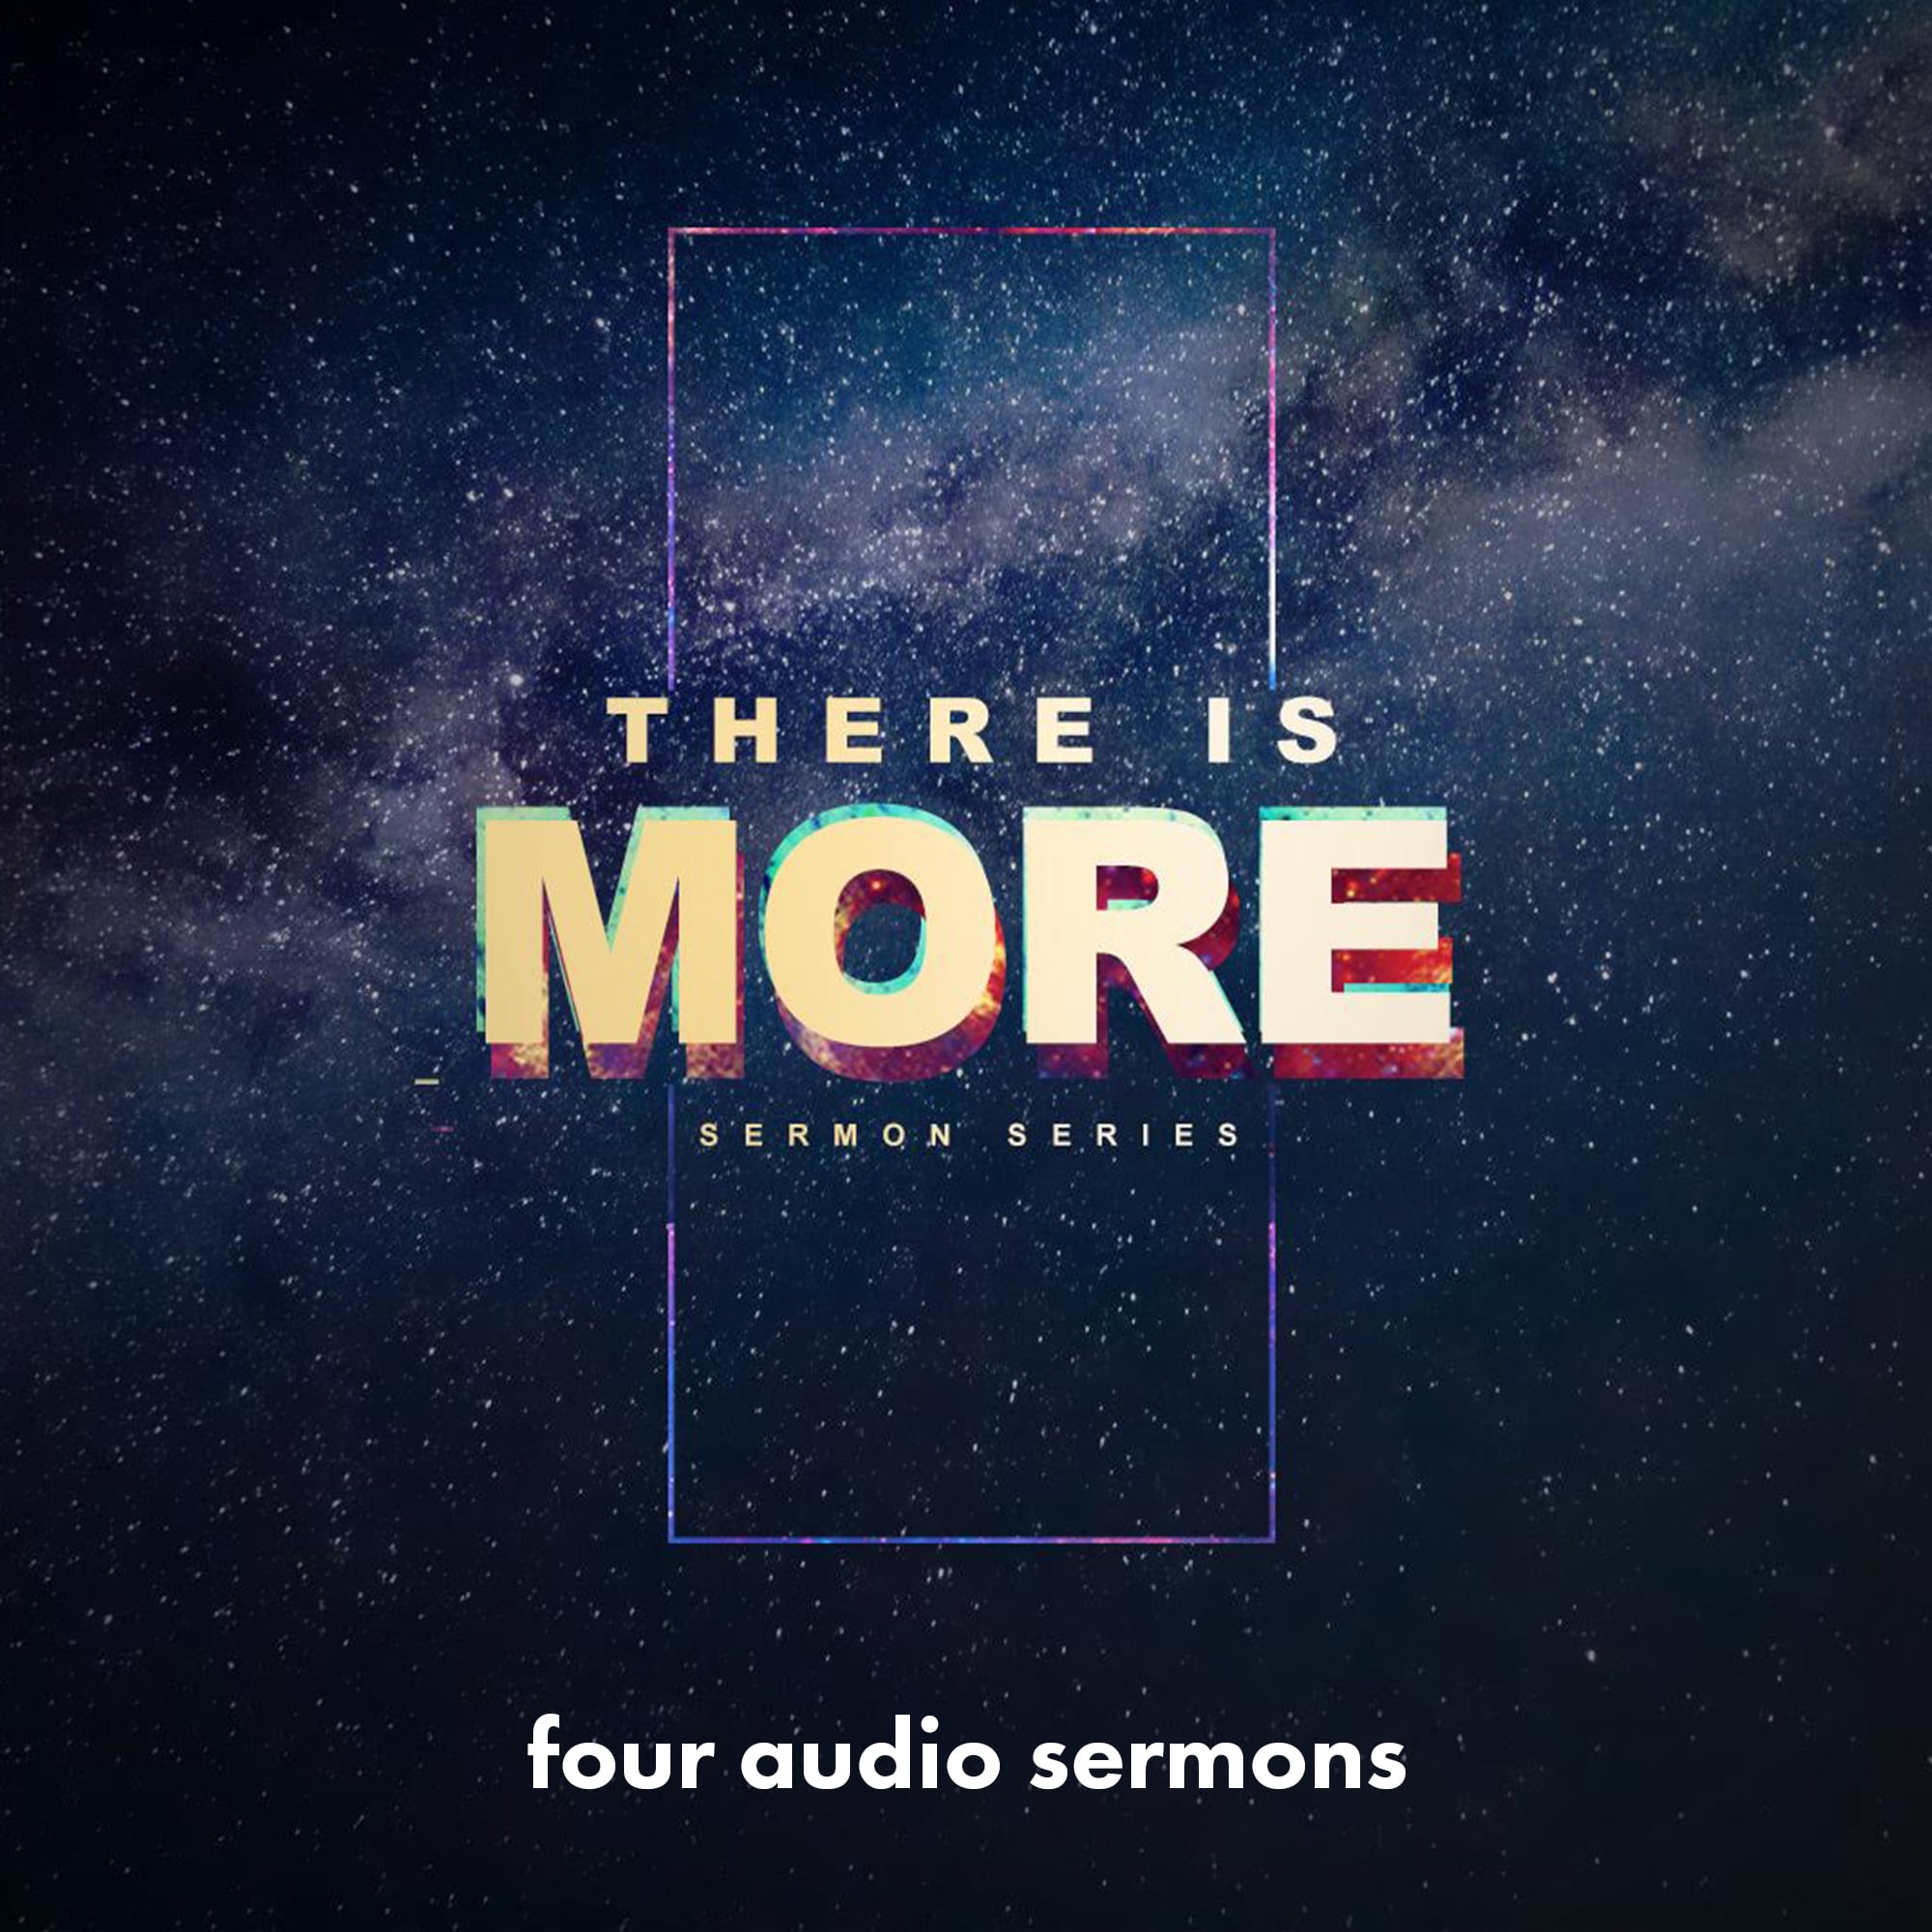 Series: There is More